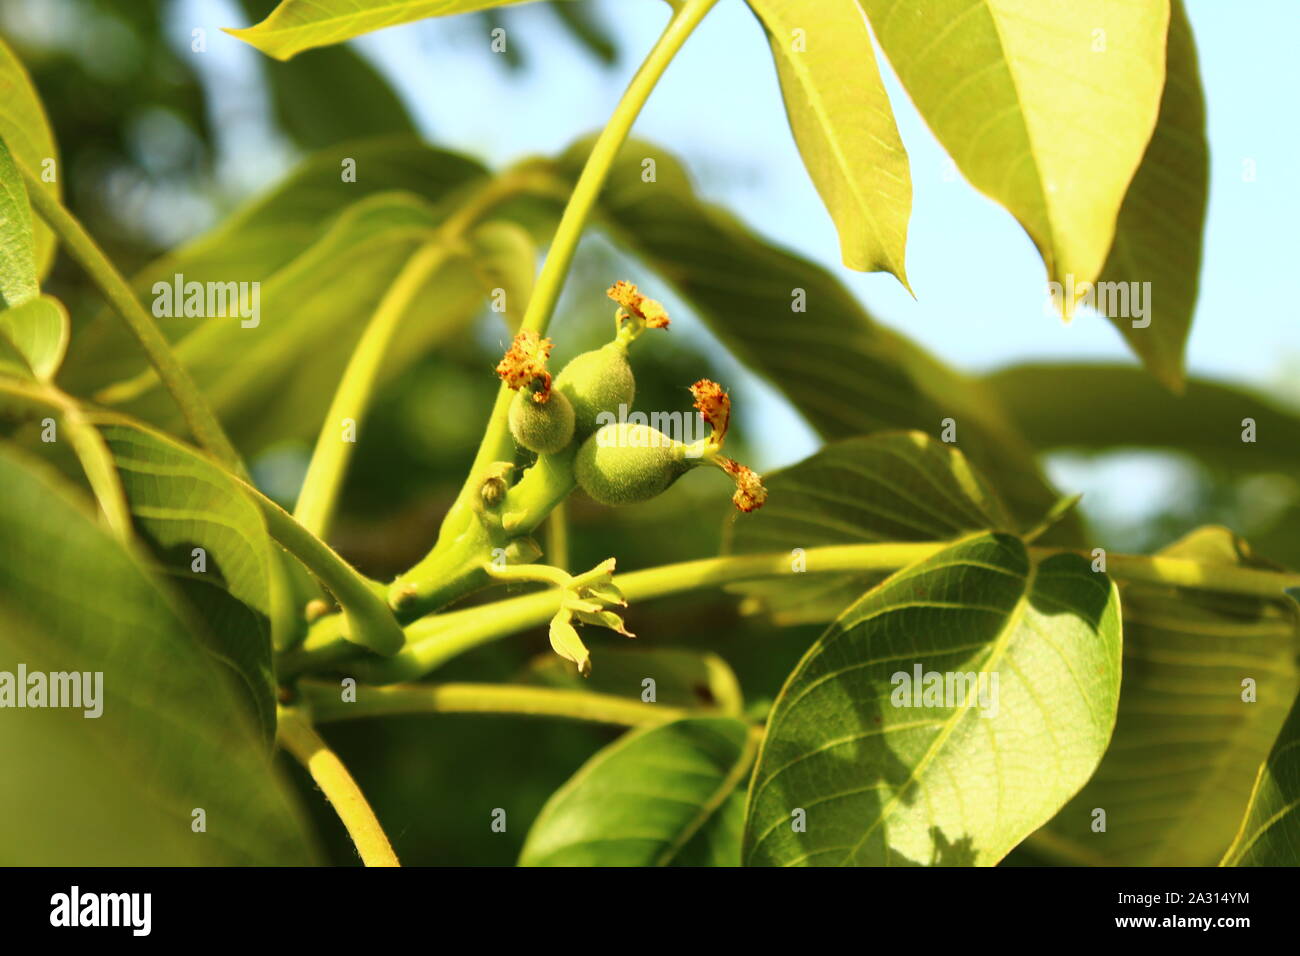 The picture shows little walnuts on the walnut tree. Stock Photo